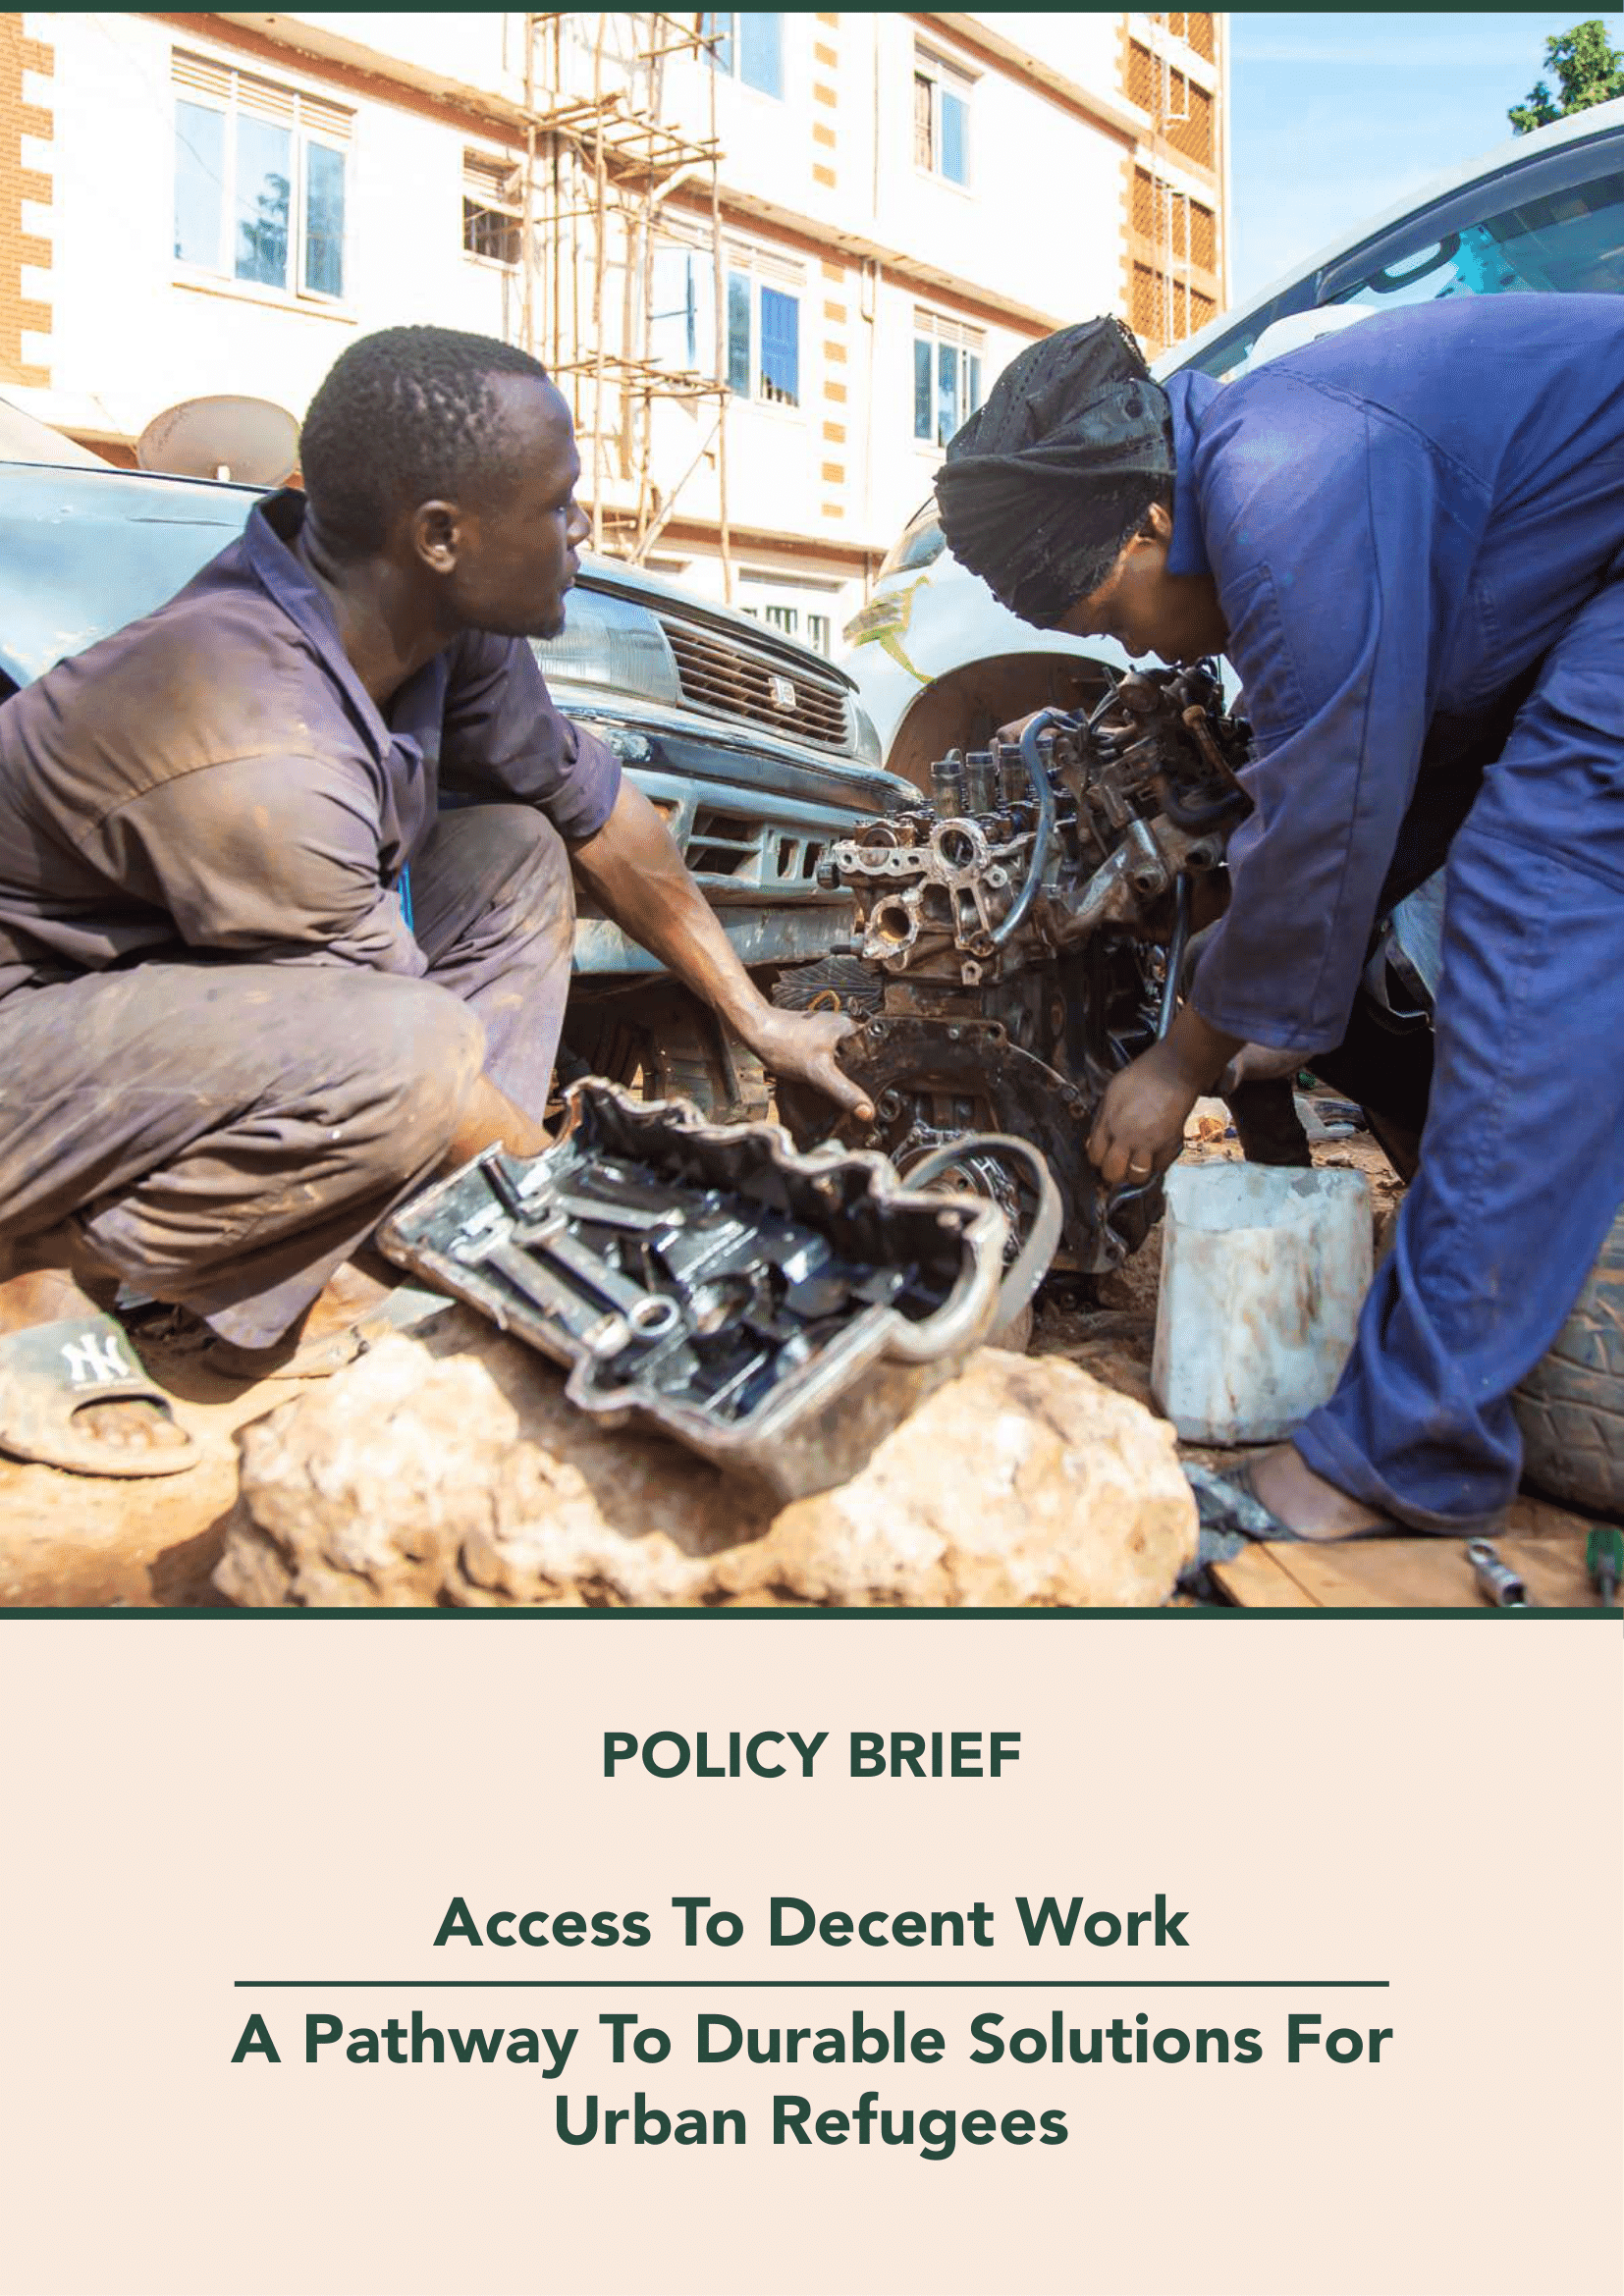 Access to Decent work - A pathway To Durable Solutions For Urban Refugees